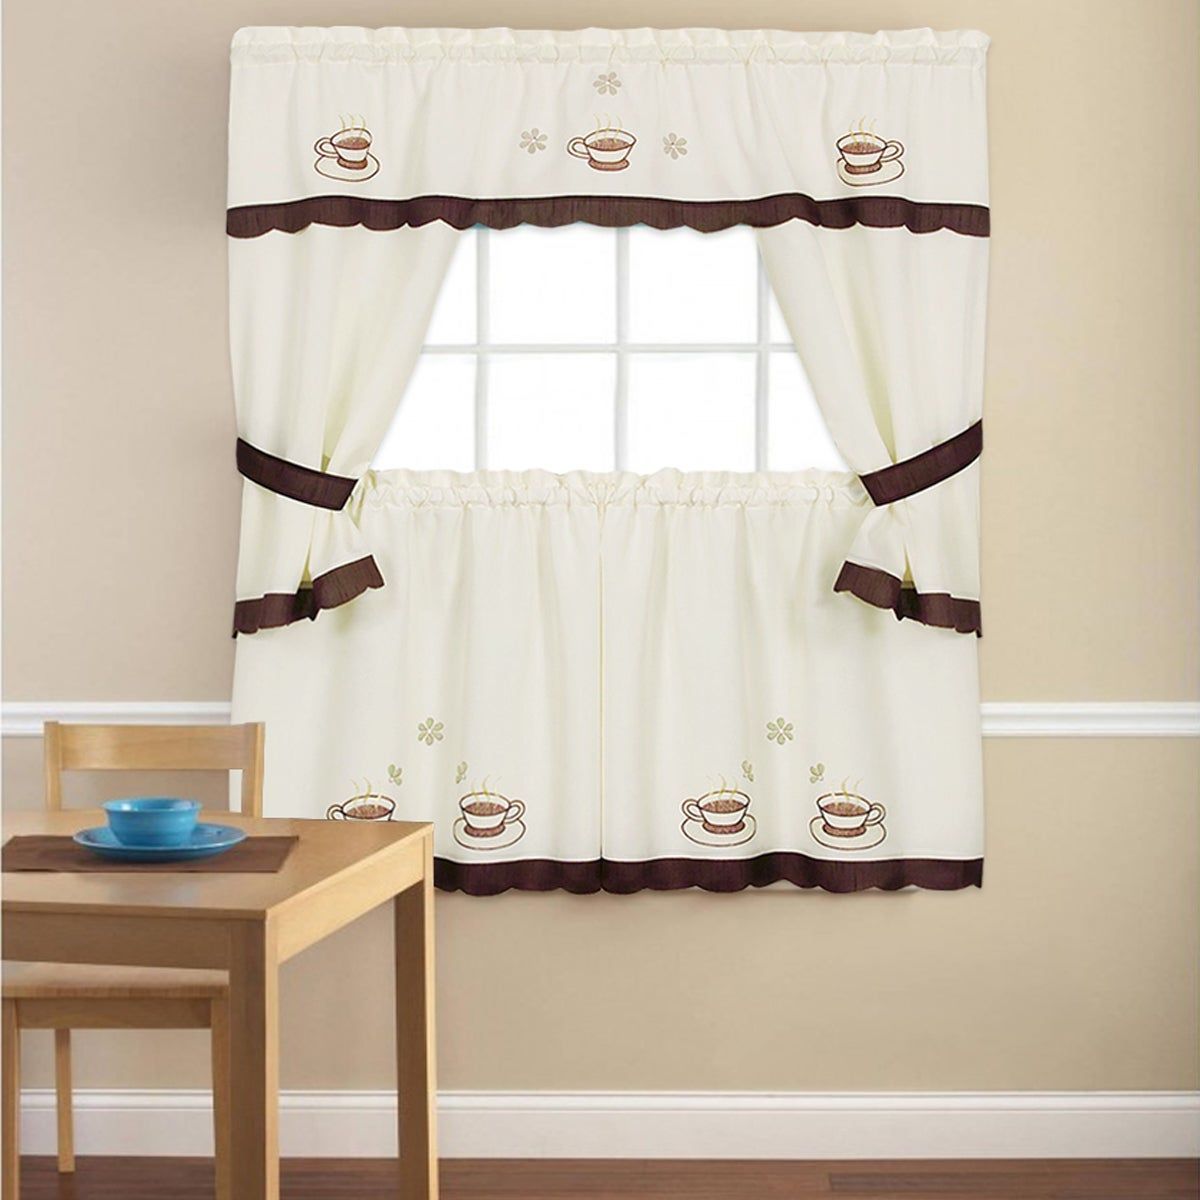 Embroidered 'coffee Cup' 5 Piece Kitchen Curtain Set In 5 Piece Burgundy Embroidered Cabernet Kitchen Curtain Sets (View 2 of 20)